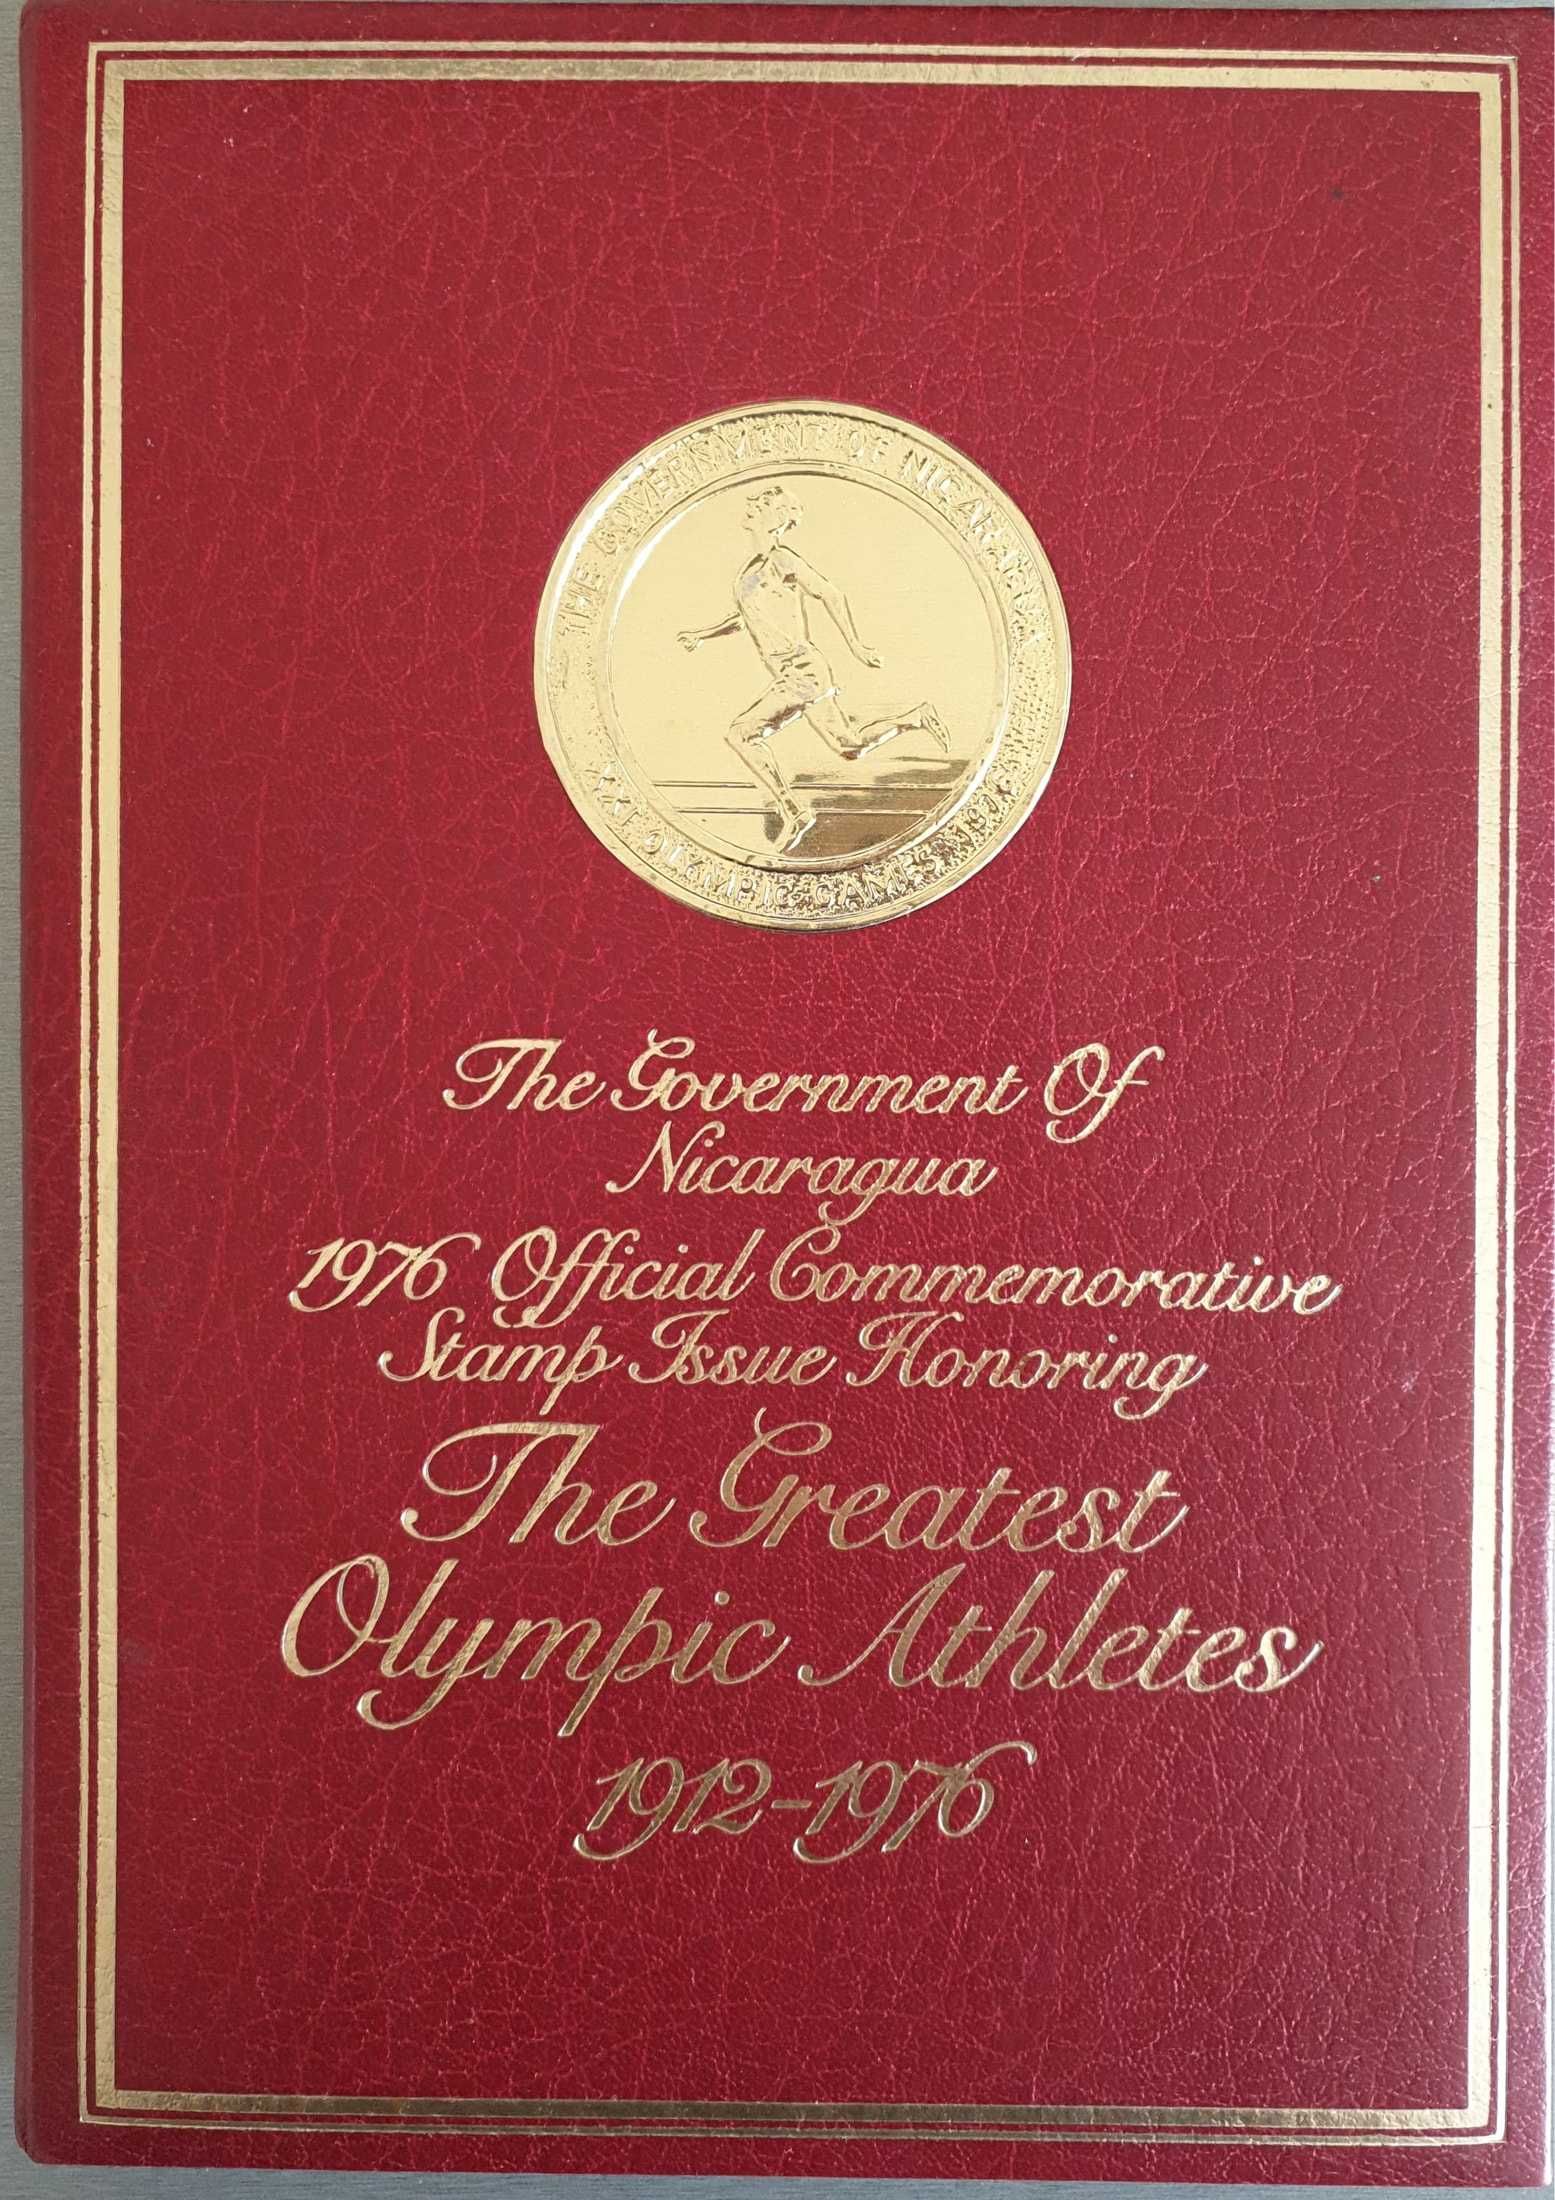 Timbre din Nicaragua '76 "The Greatest Olympic Athletes 1912-1976"